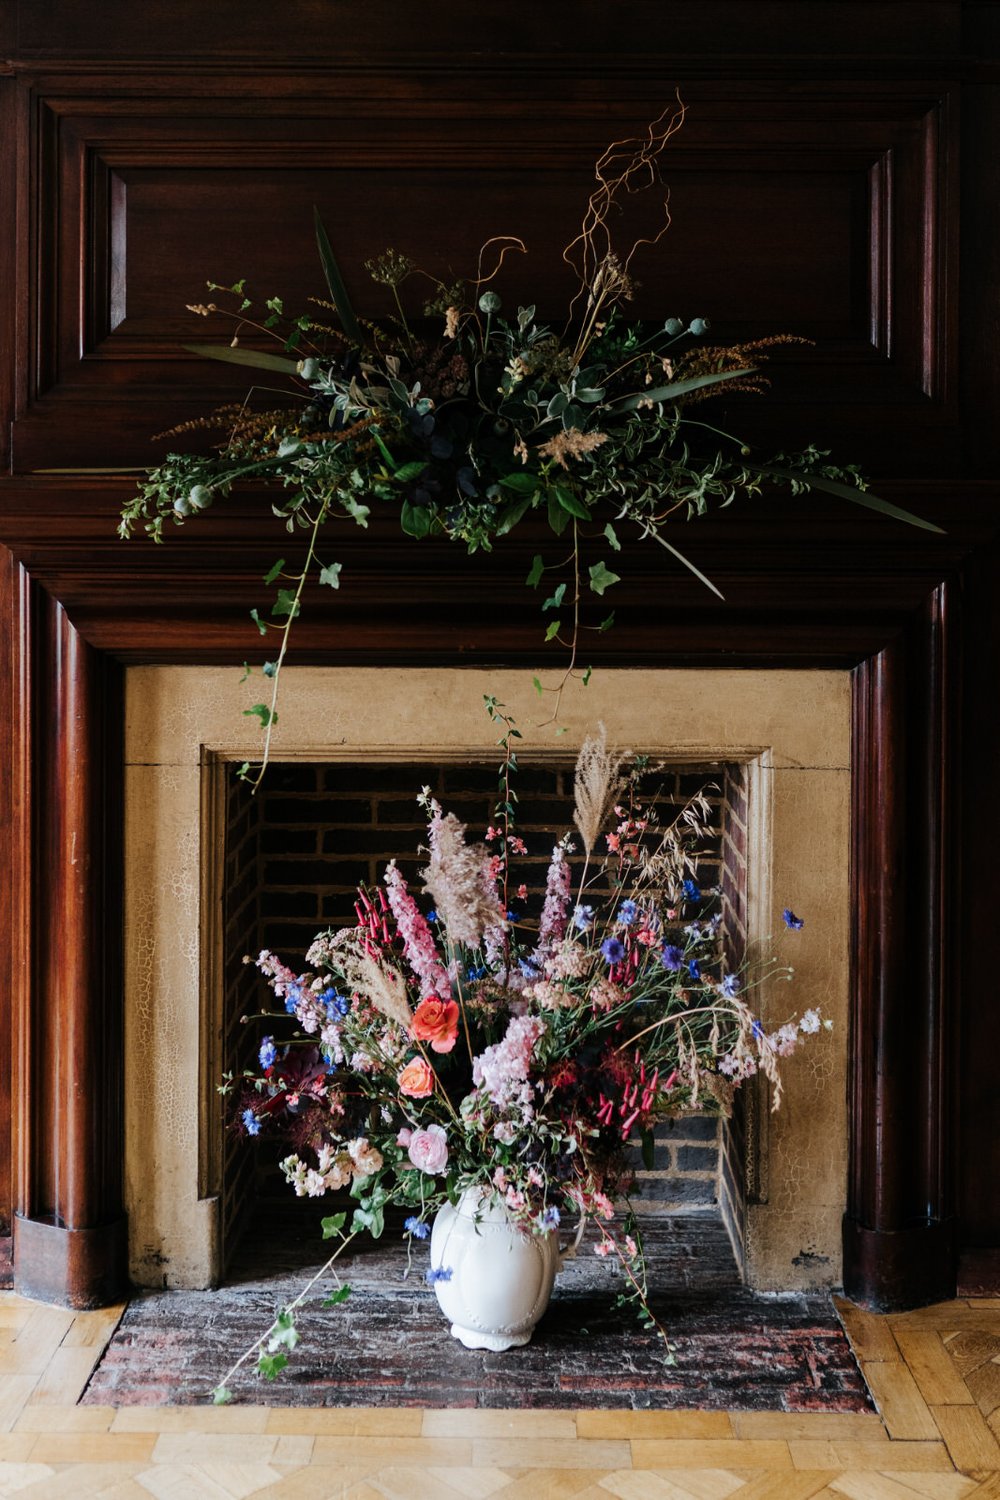 Photograph of lush, colourful and rustic wedding flowers by Wild Rosamund